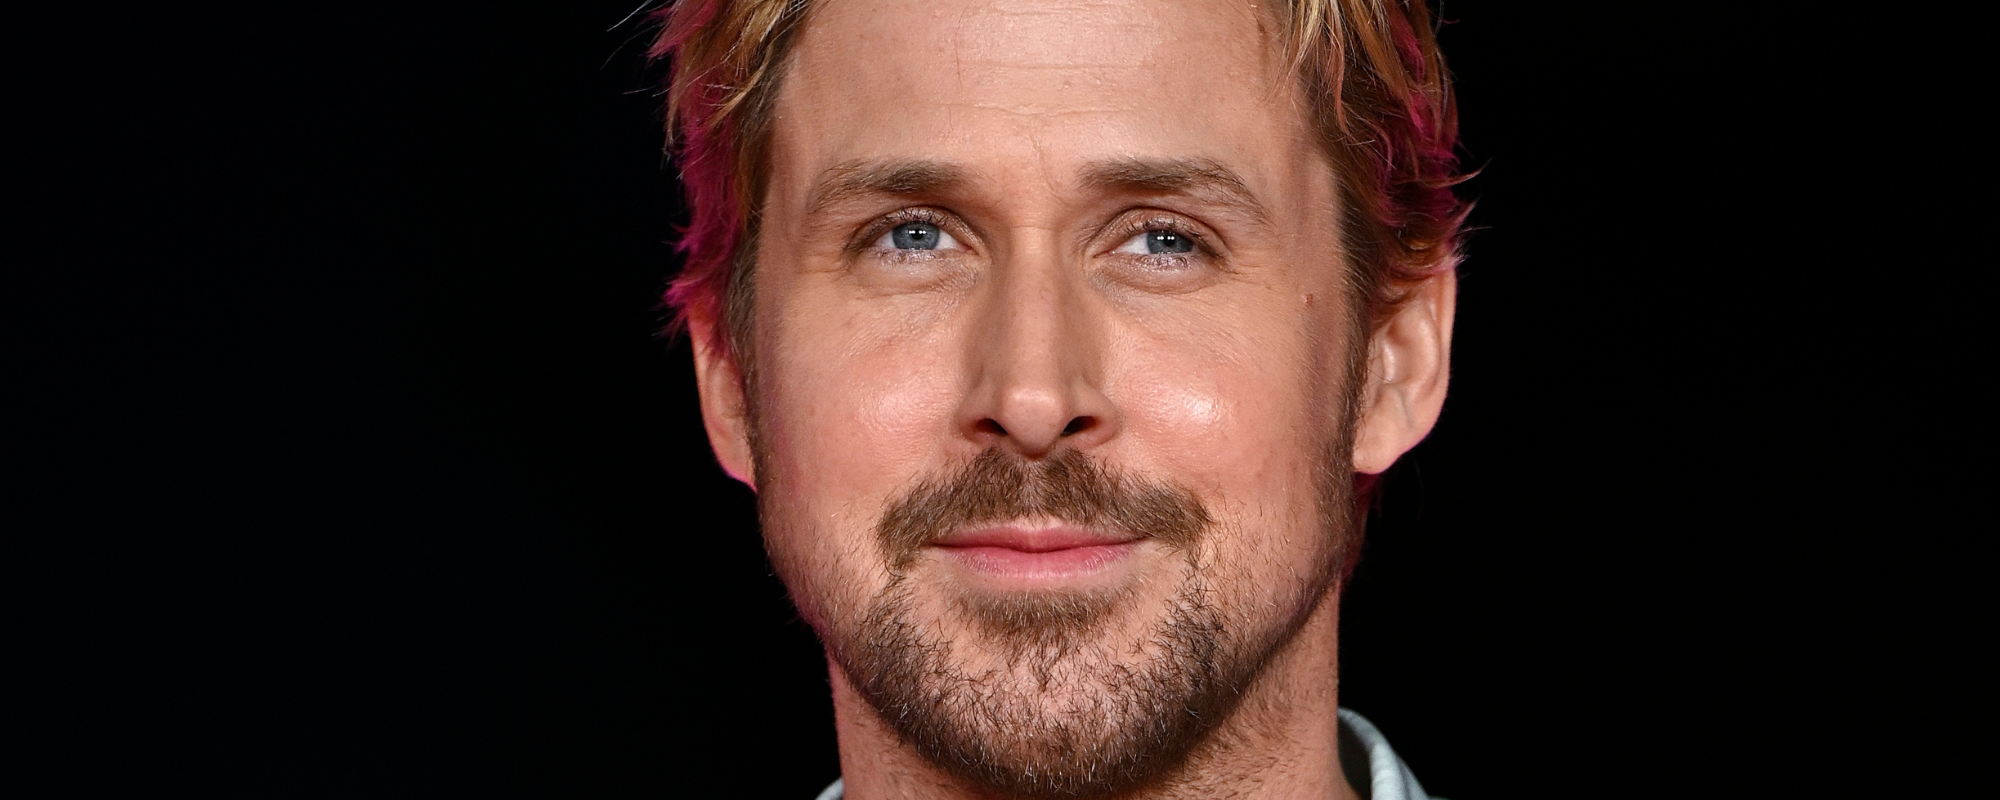 4 Songs You Didn’t Know Ryan Gosling Wrote